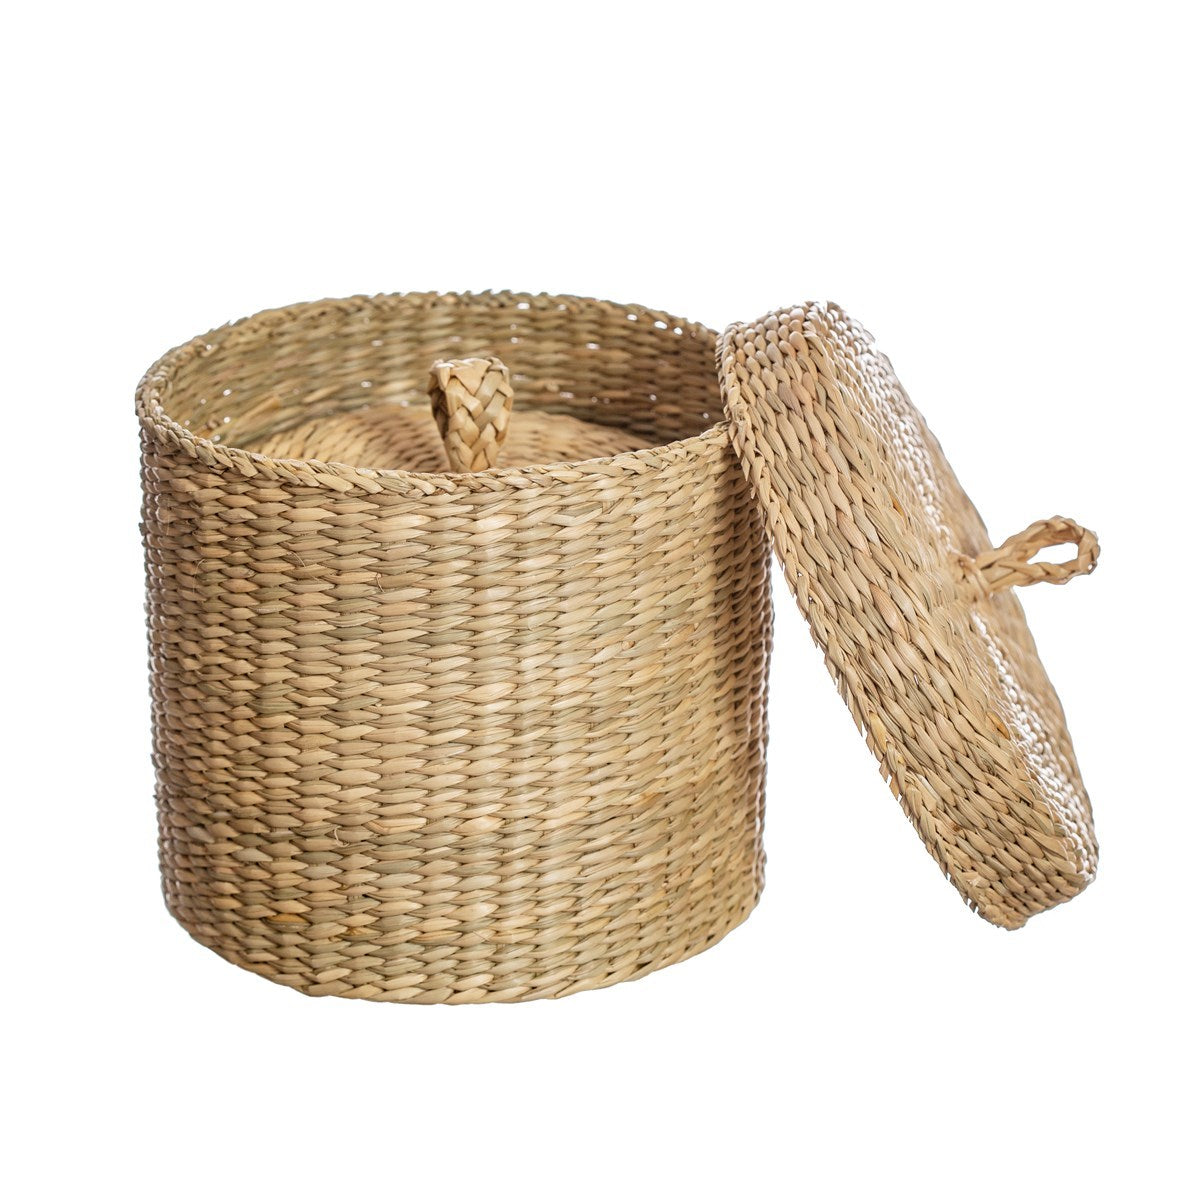 Seagrass Baskets With Lid - Set Of 2